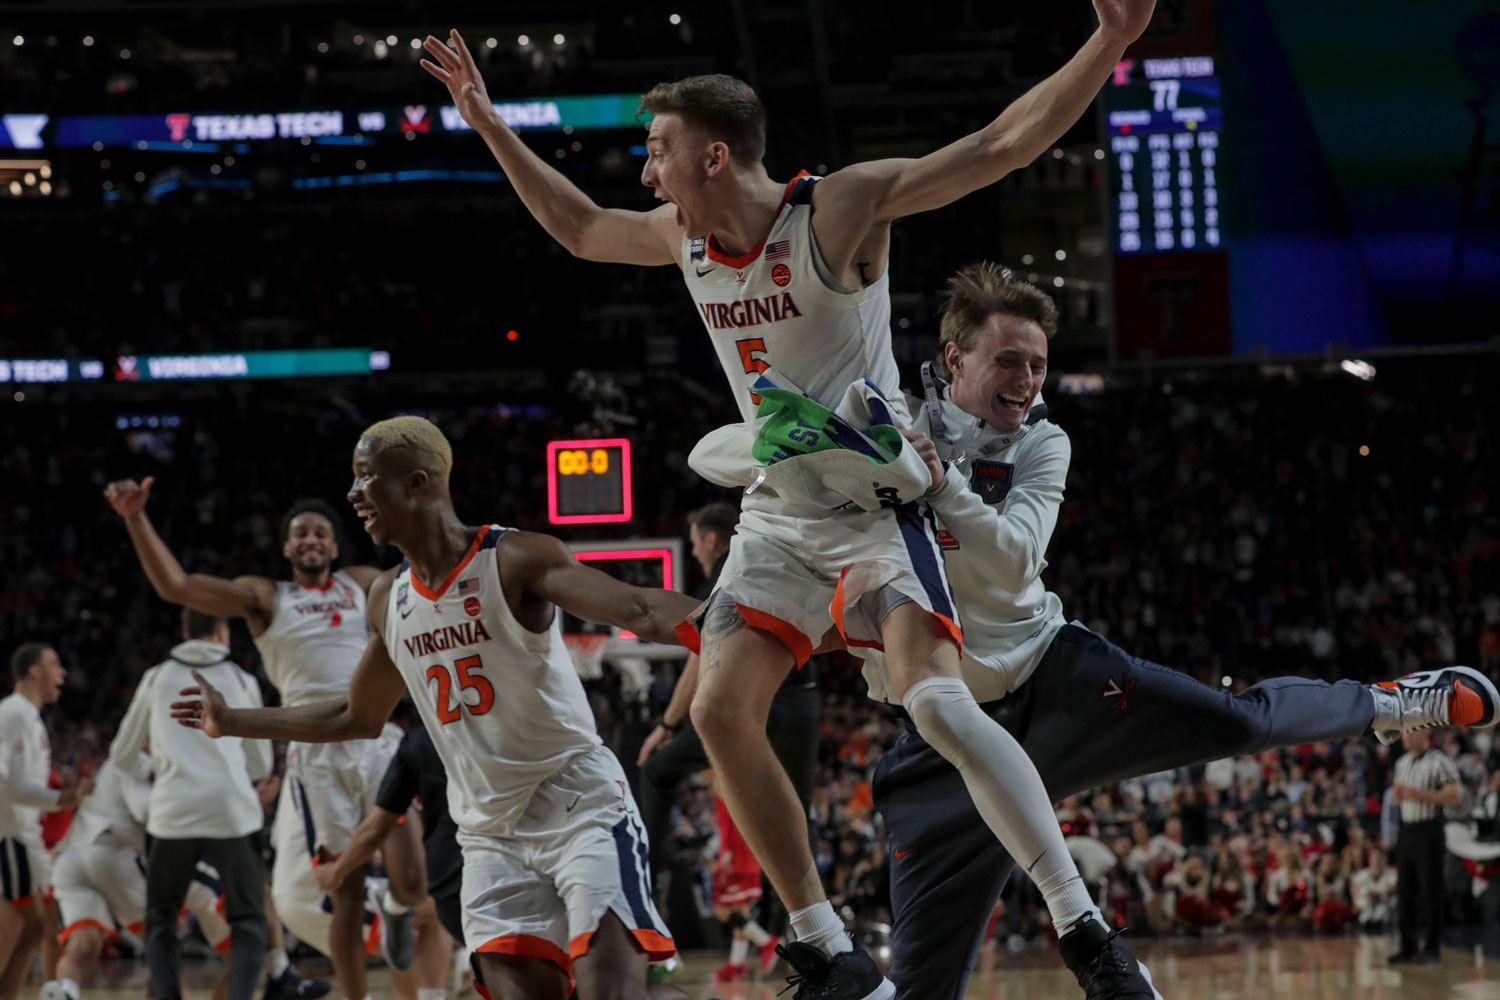 Kyle Guy jumping in the air and being held by teammate after winning the game